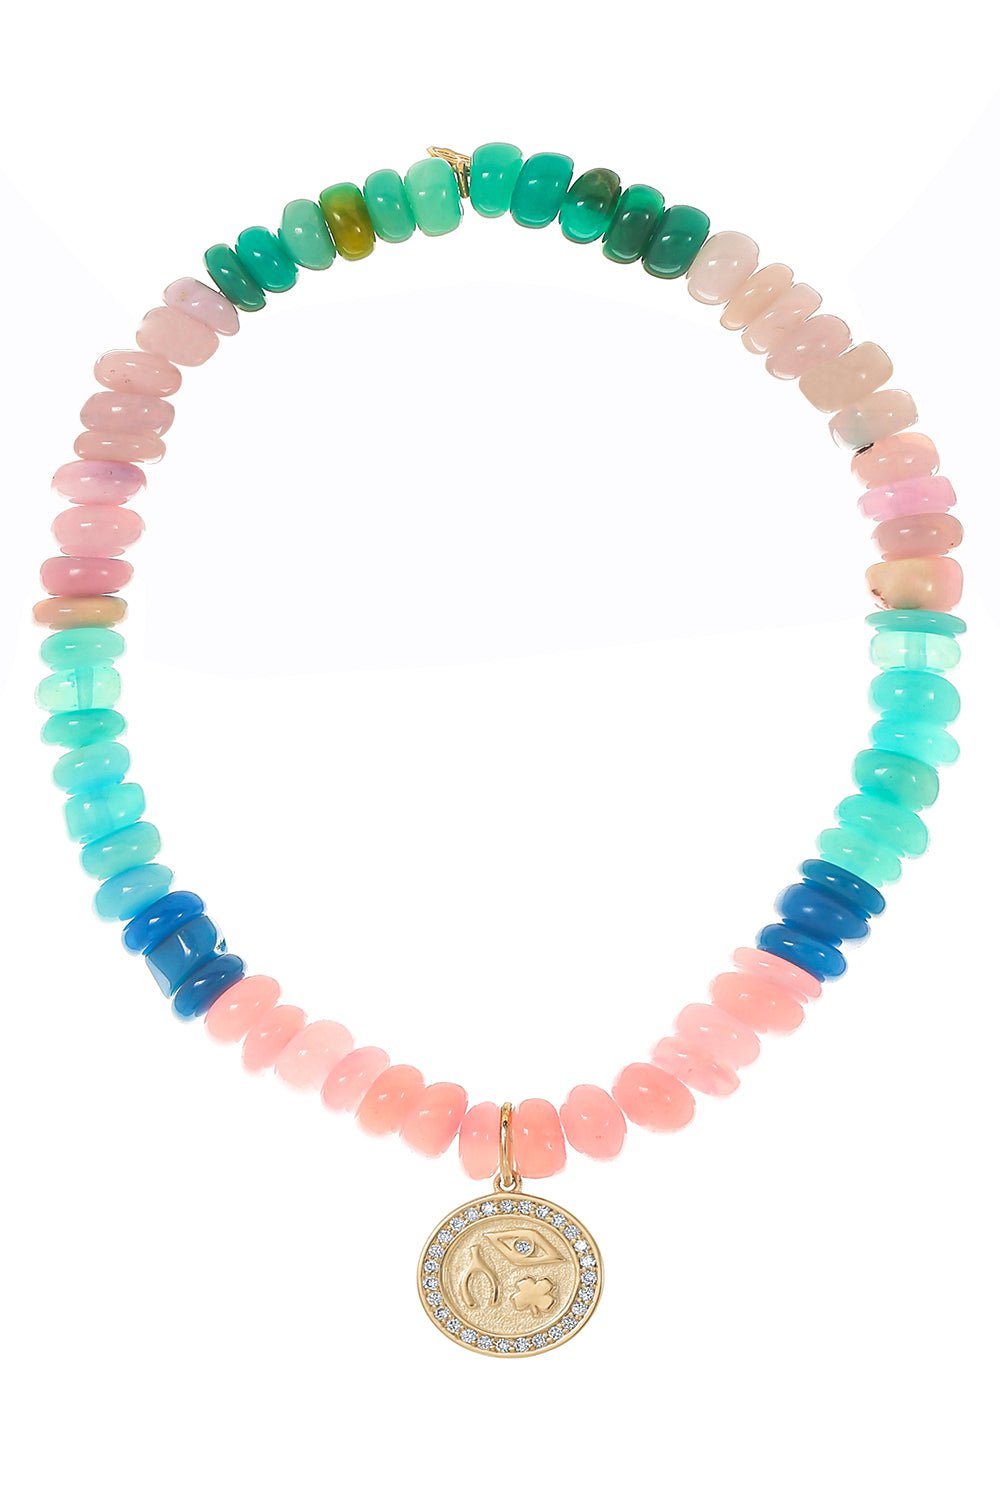 SYDNEY EVAN-Luck And Protection Opal Bracelet-YELLOW GOLD